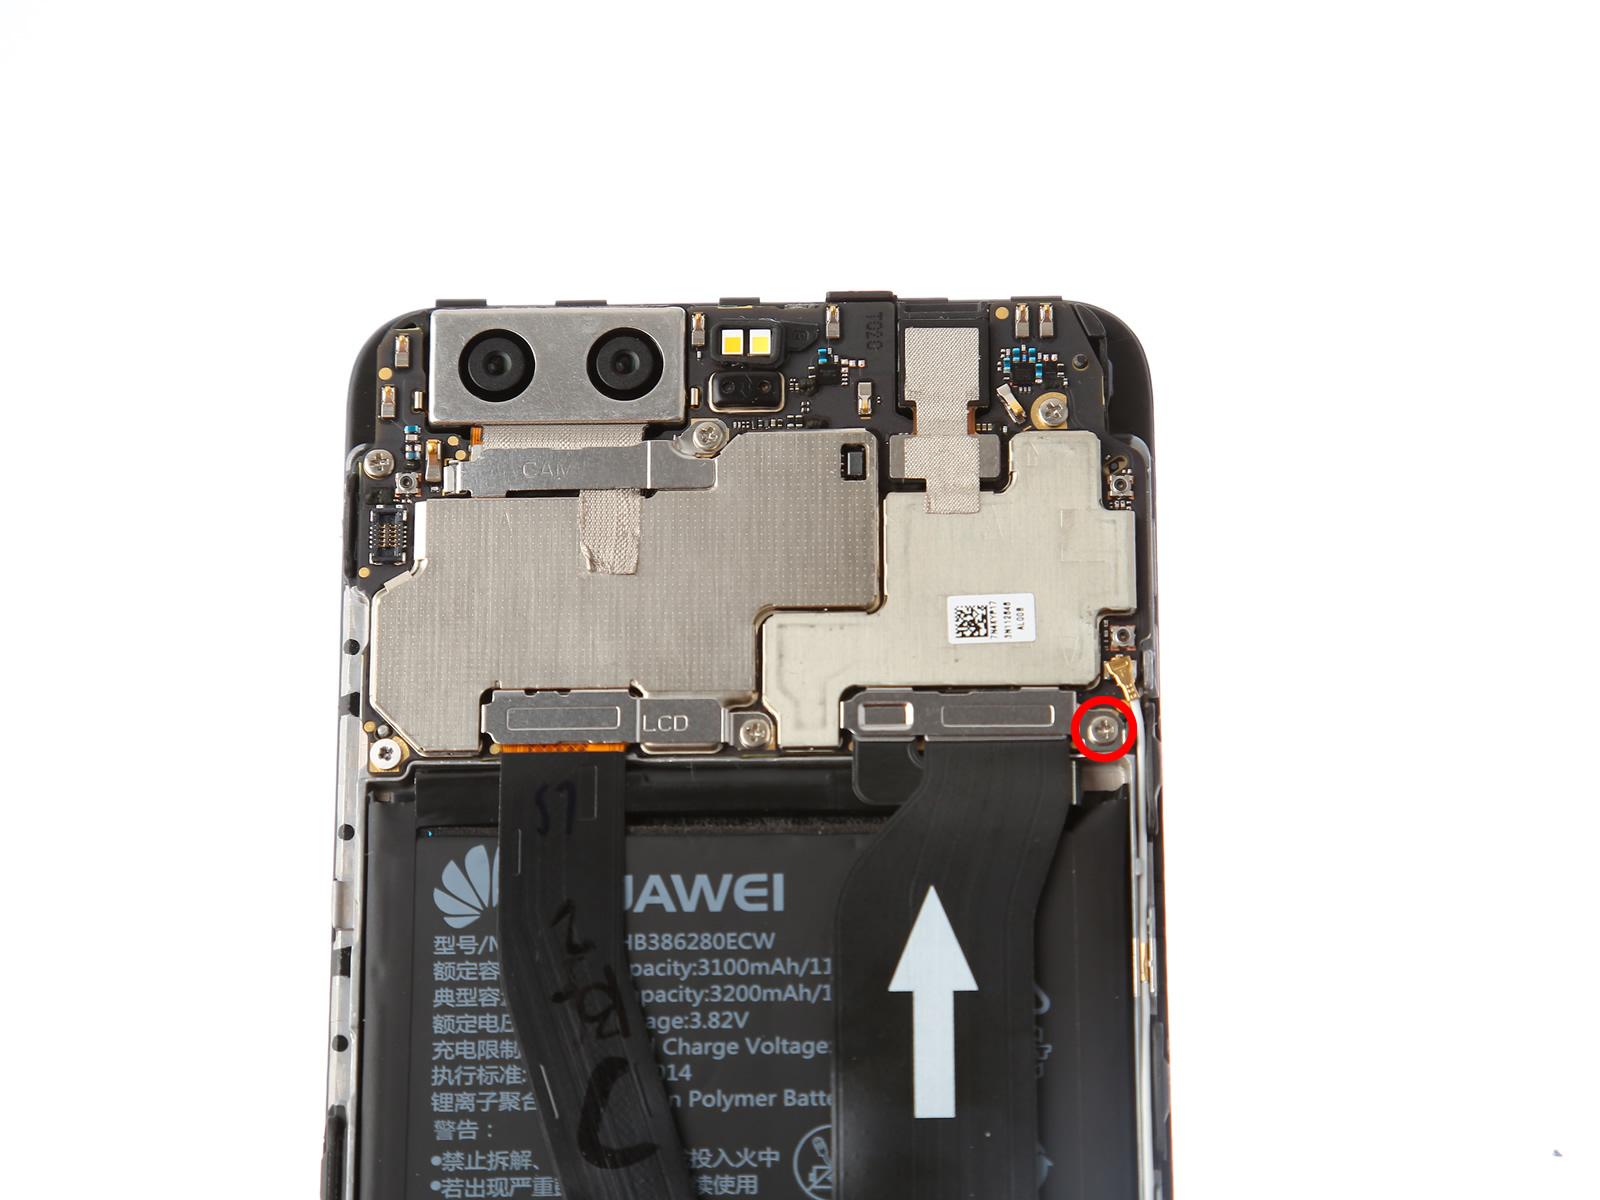 Huawei P10 Motherboard Removal